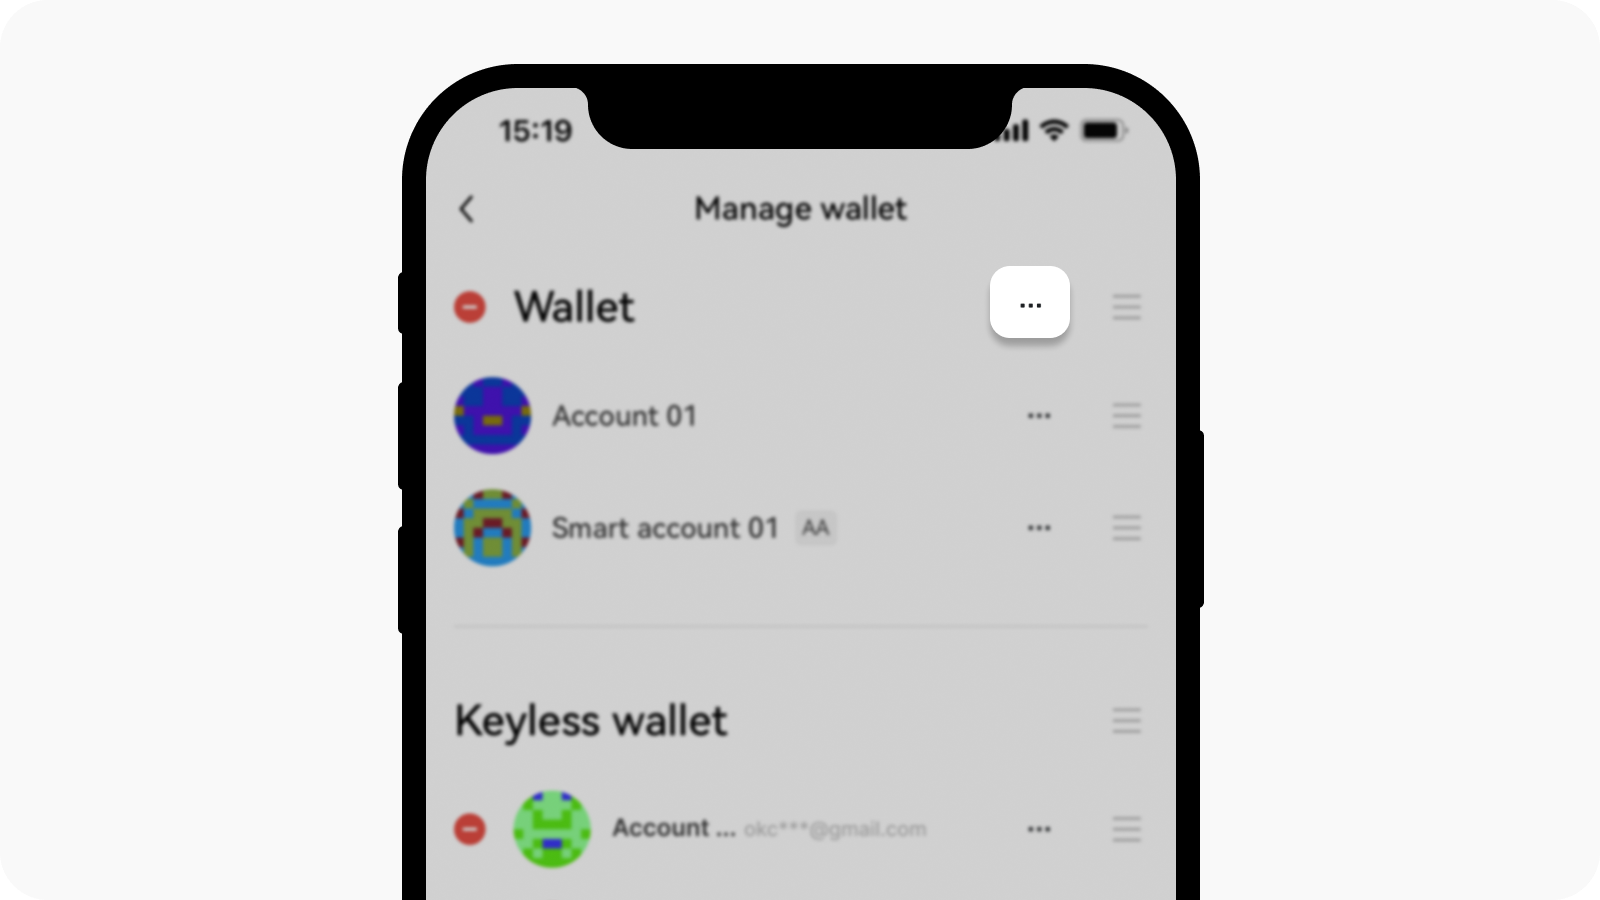 Select add account under wallet A